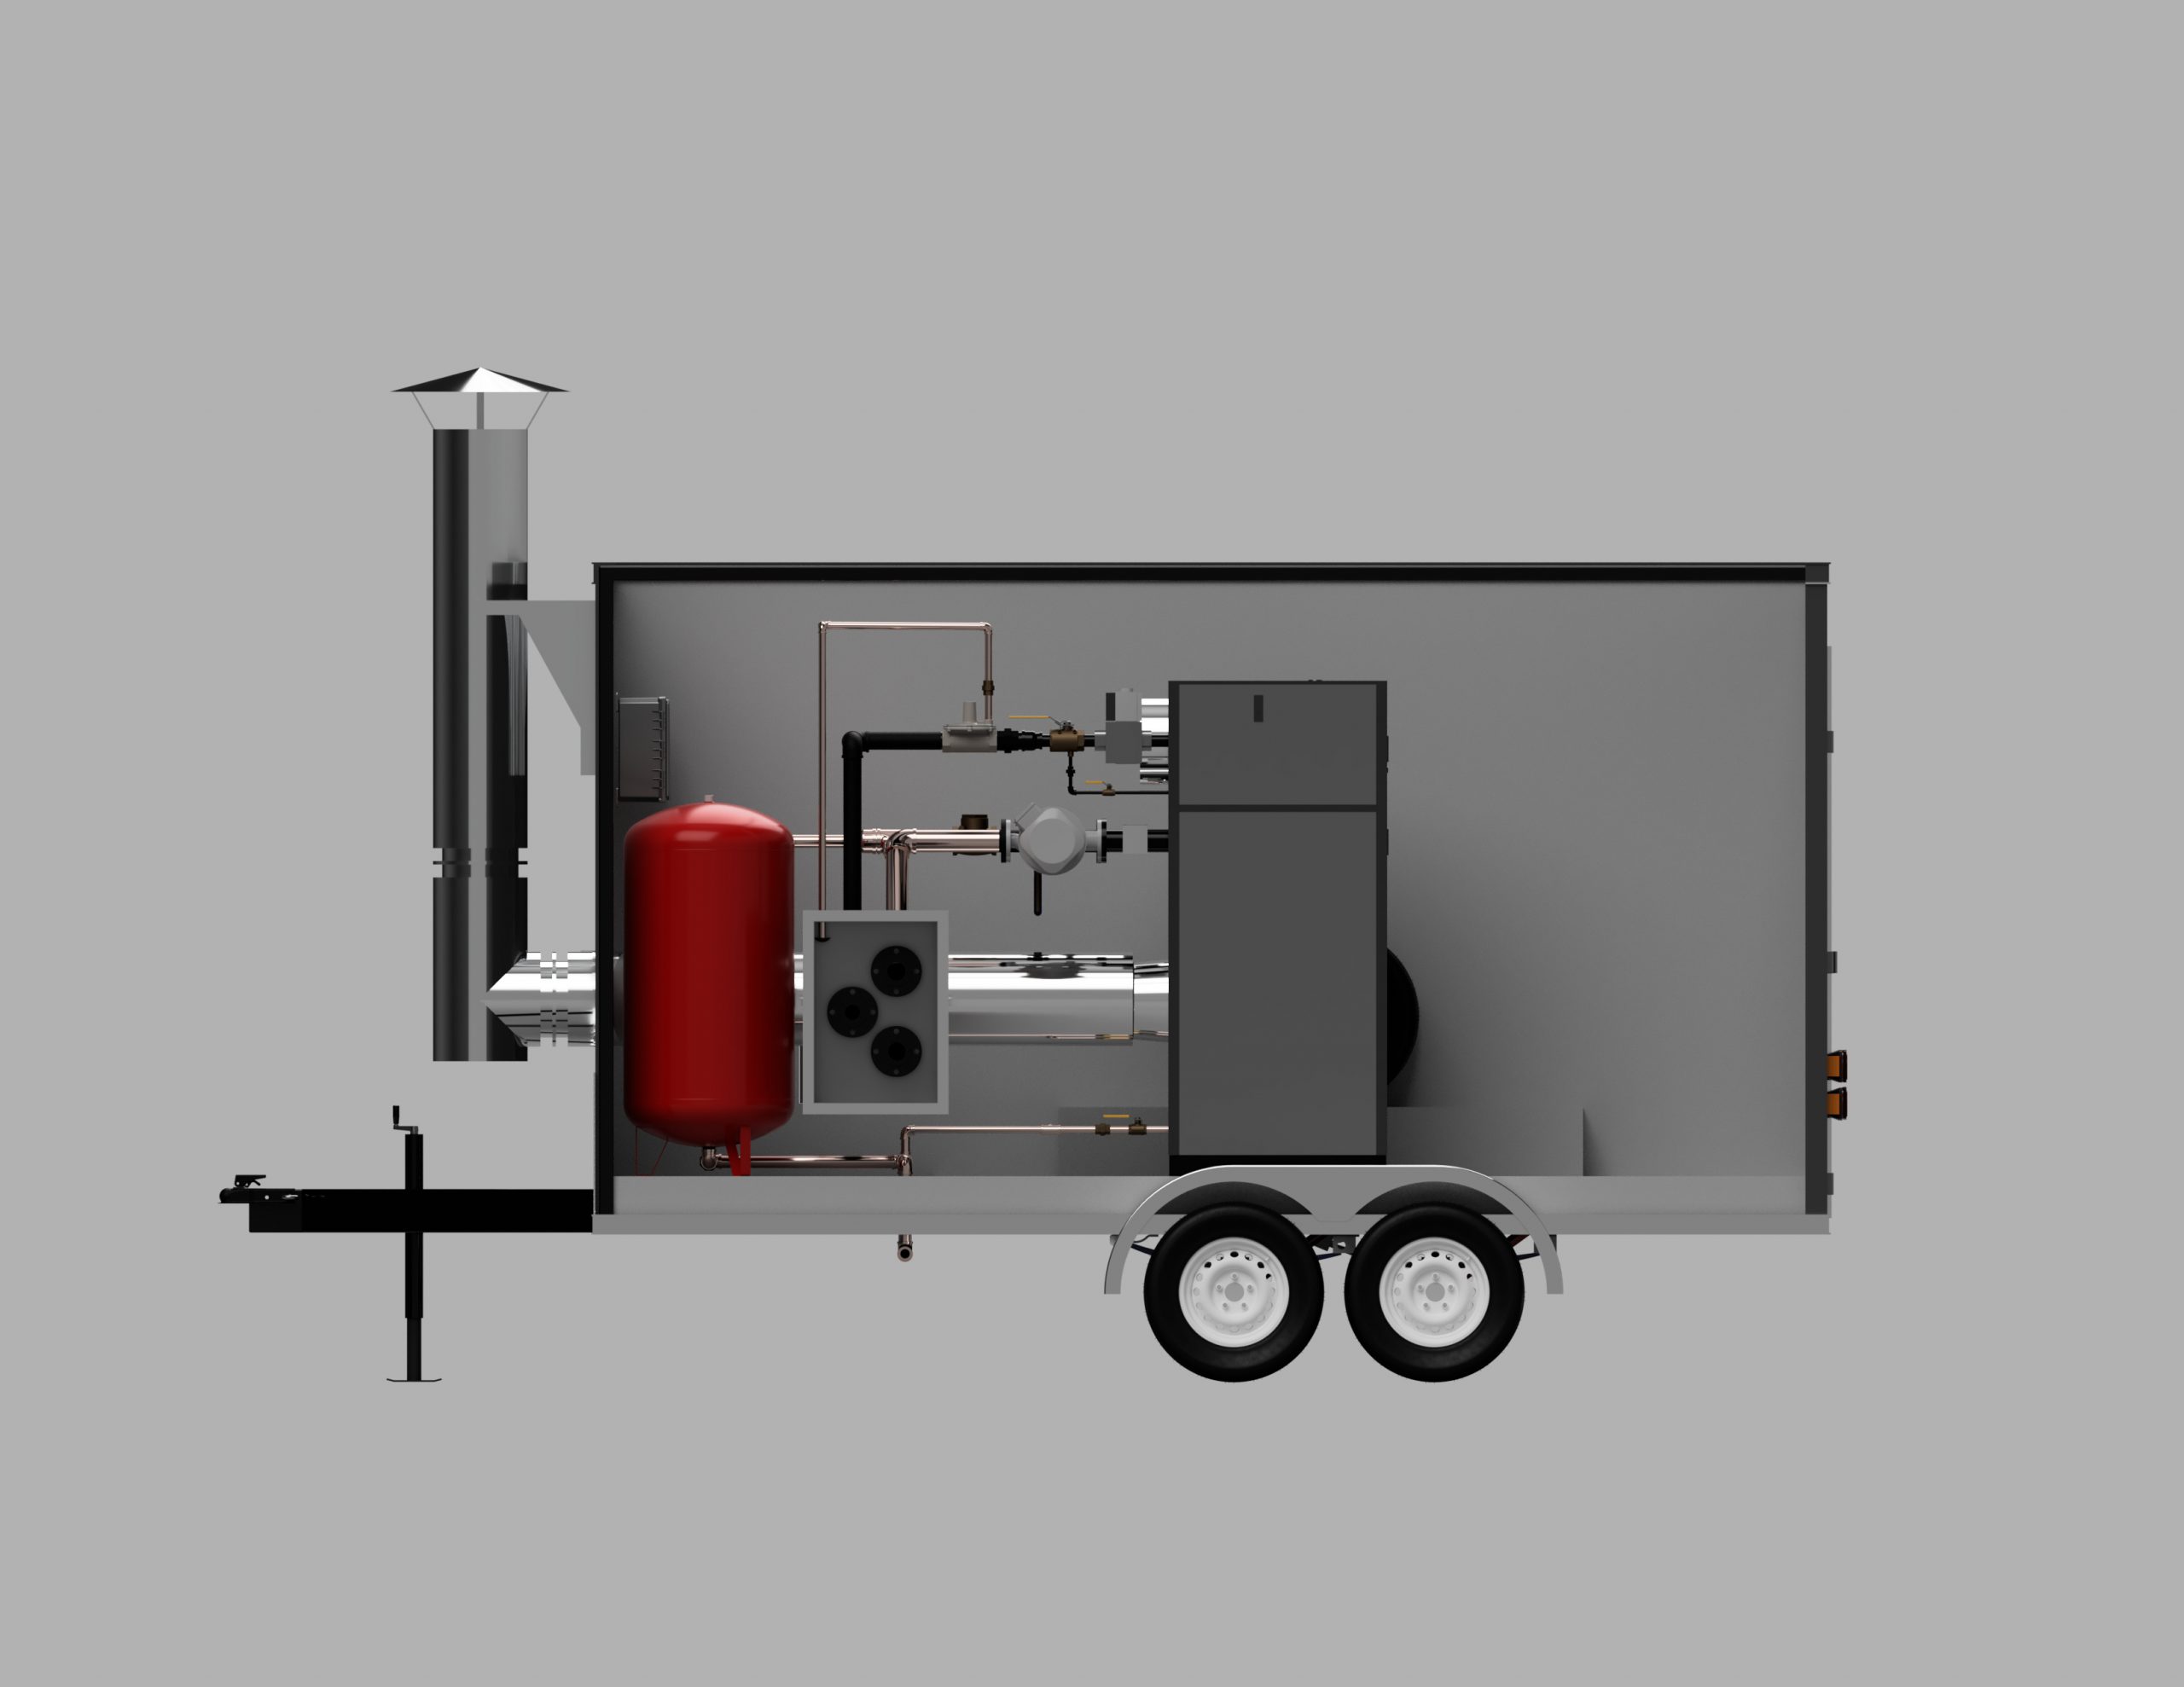 Explore the working and the principle of a boiler